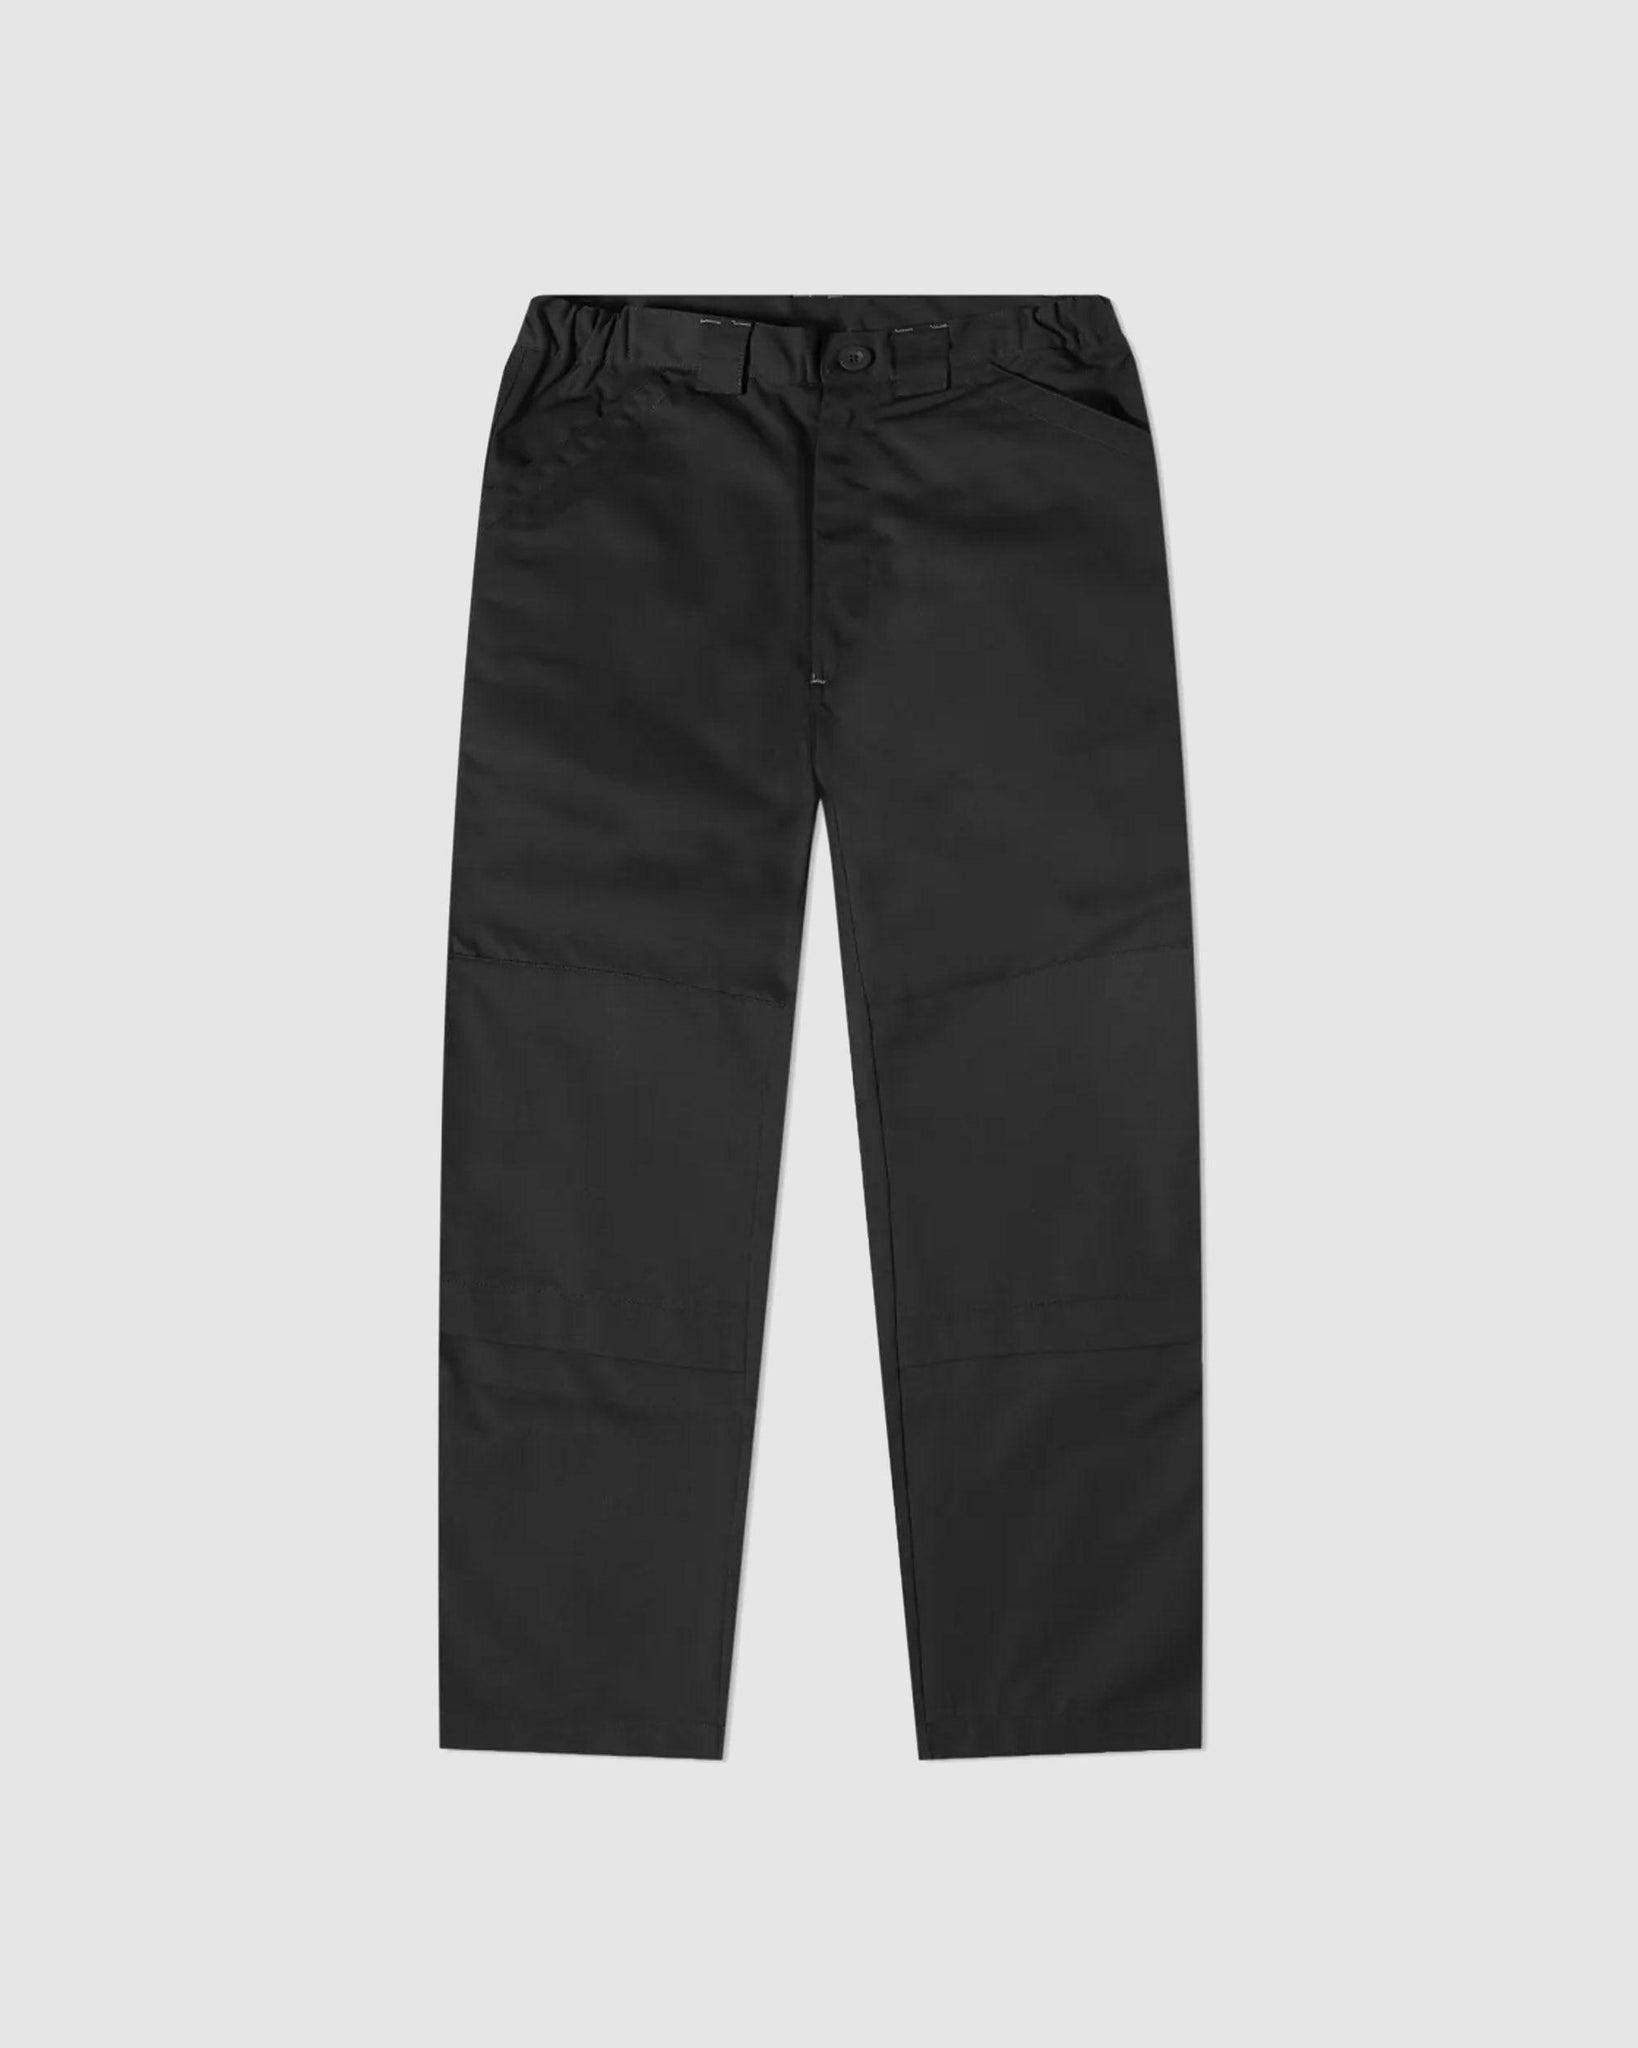 Replicated Klopman Pants - {{ collection.title }} - Chinatown Country Club 